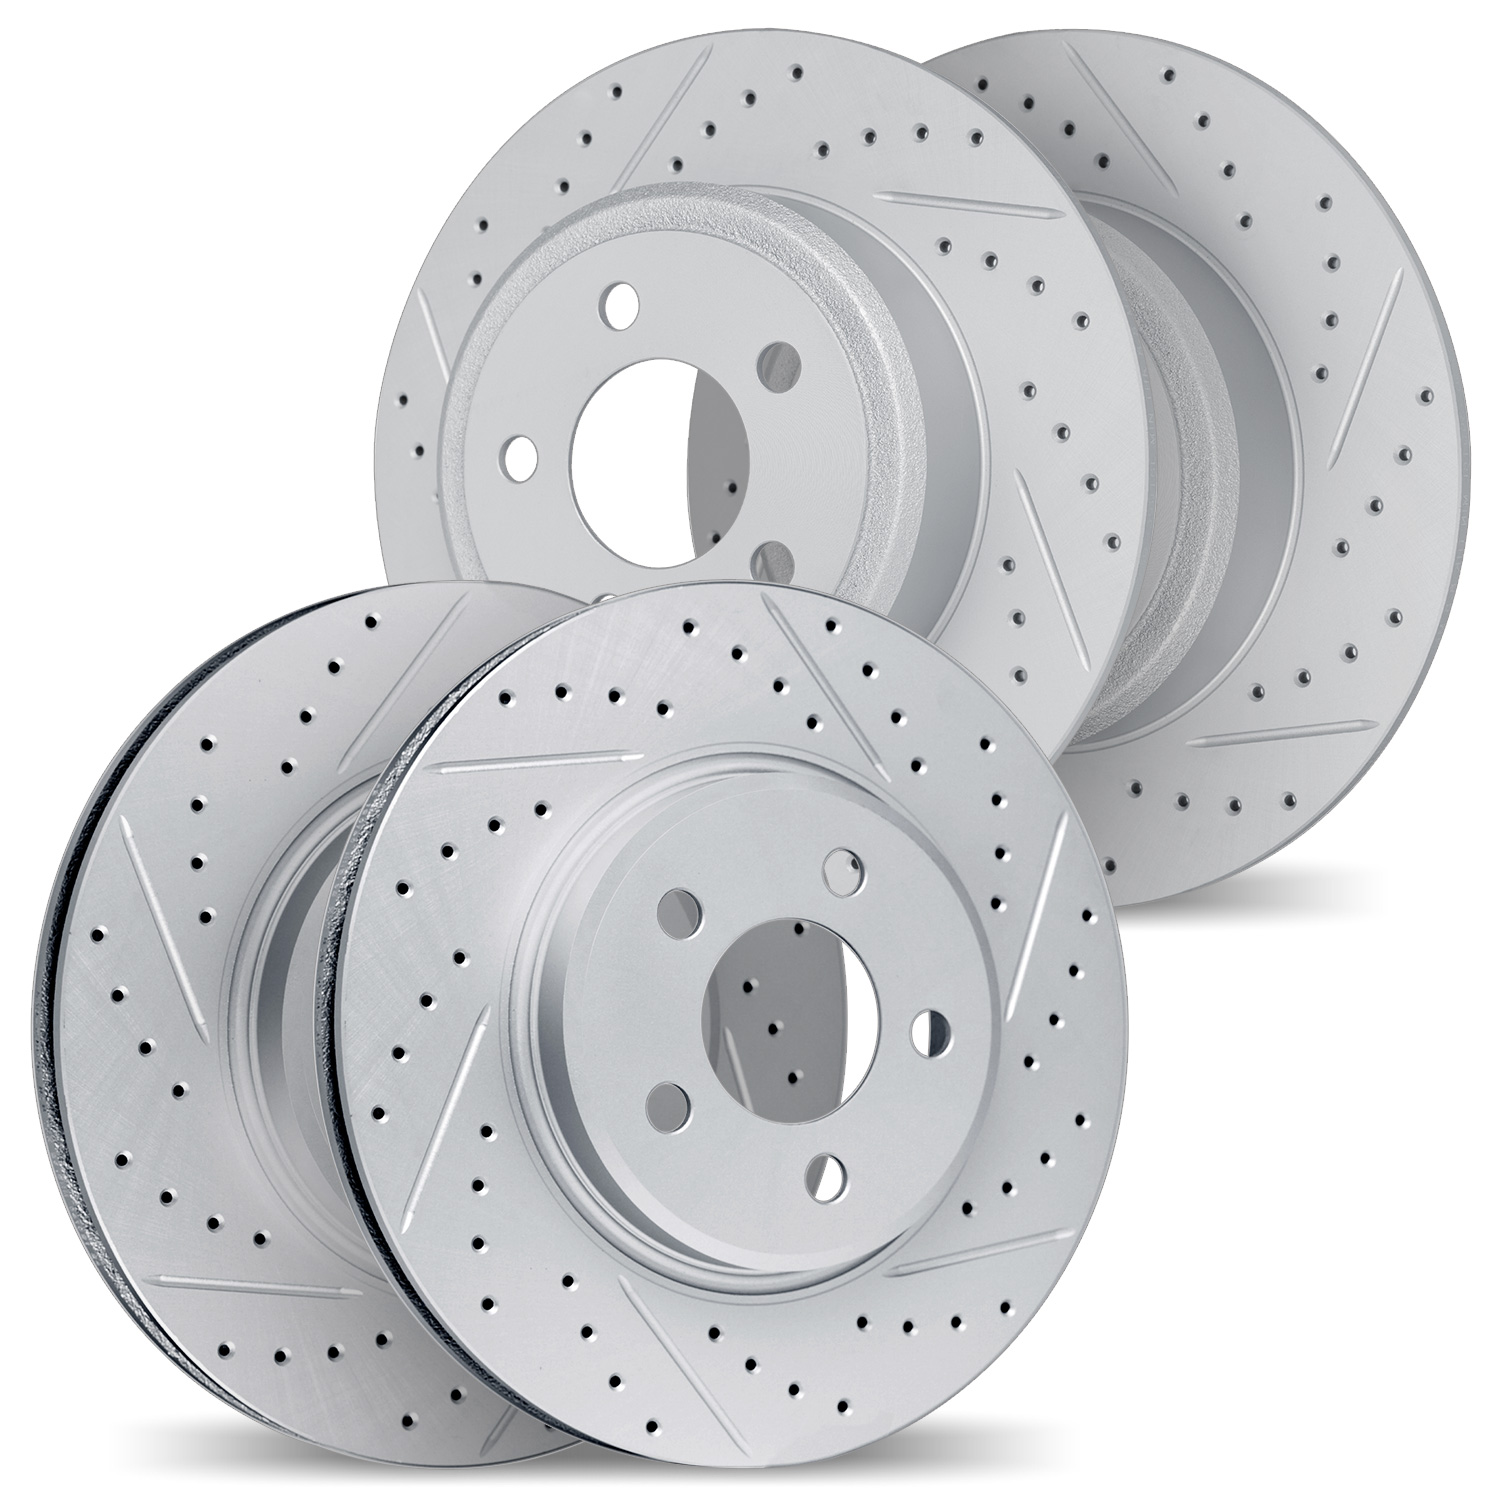 2004-75012 Geoperformance Drilled/Slotted Brake Rotors, 2006-2015 Lexus/Toyota/Scion, Position: Front and Rear